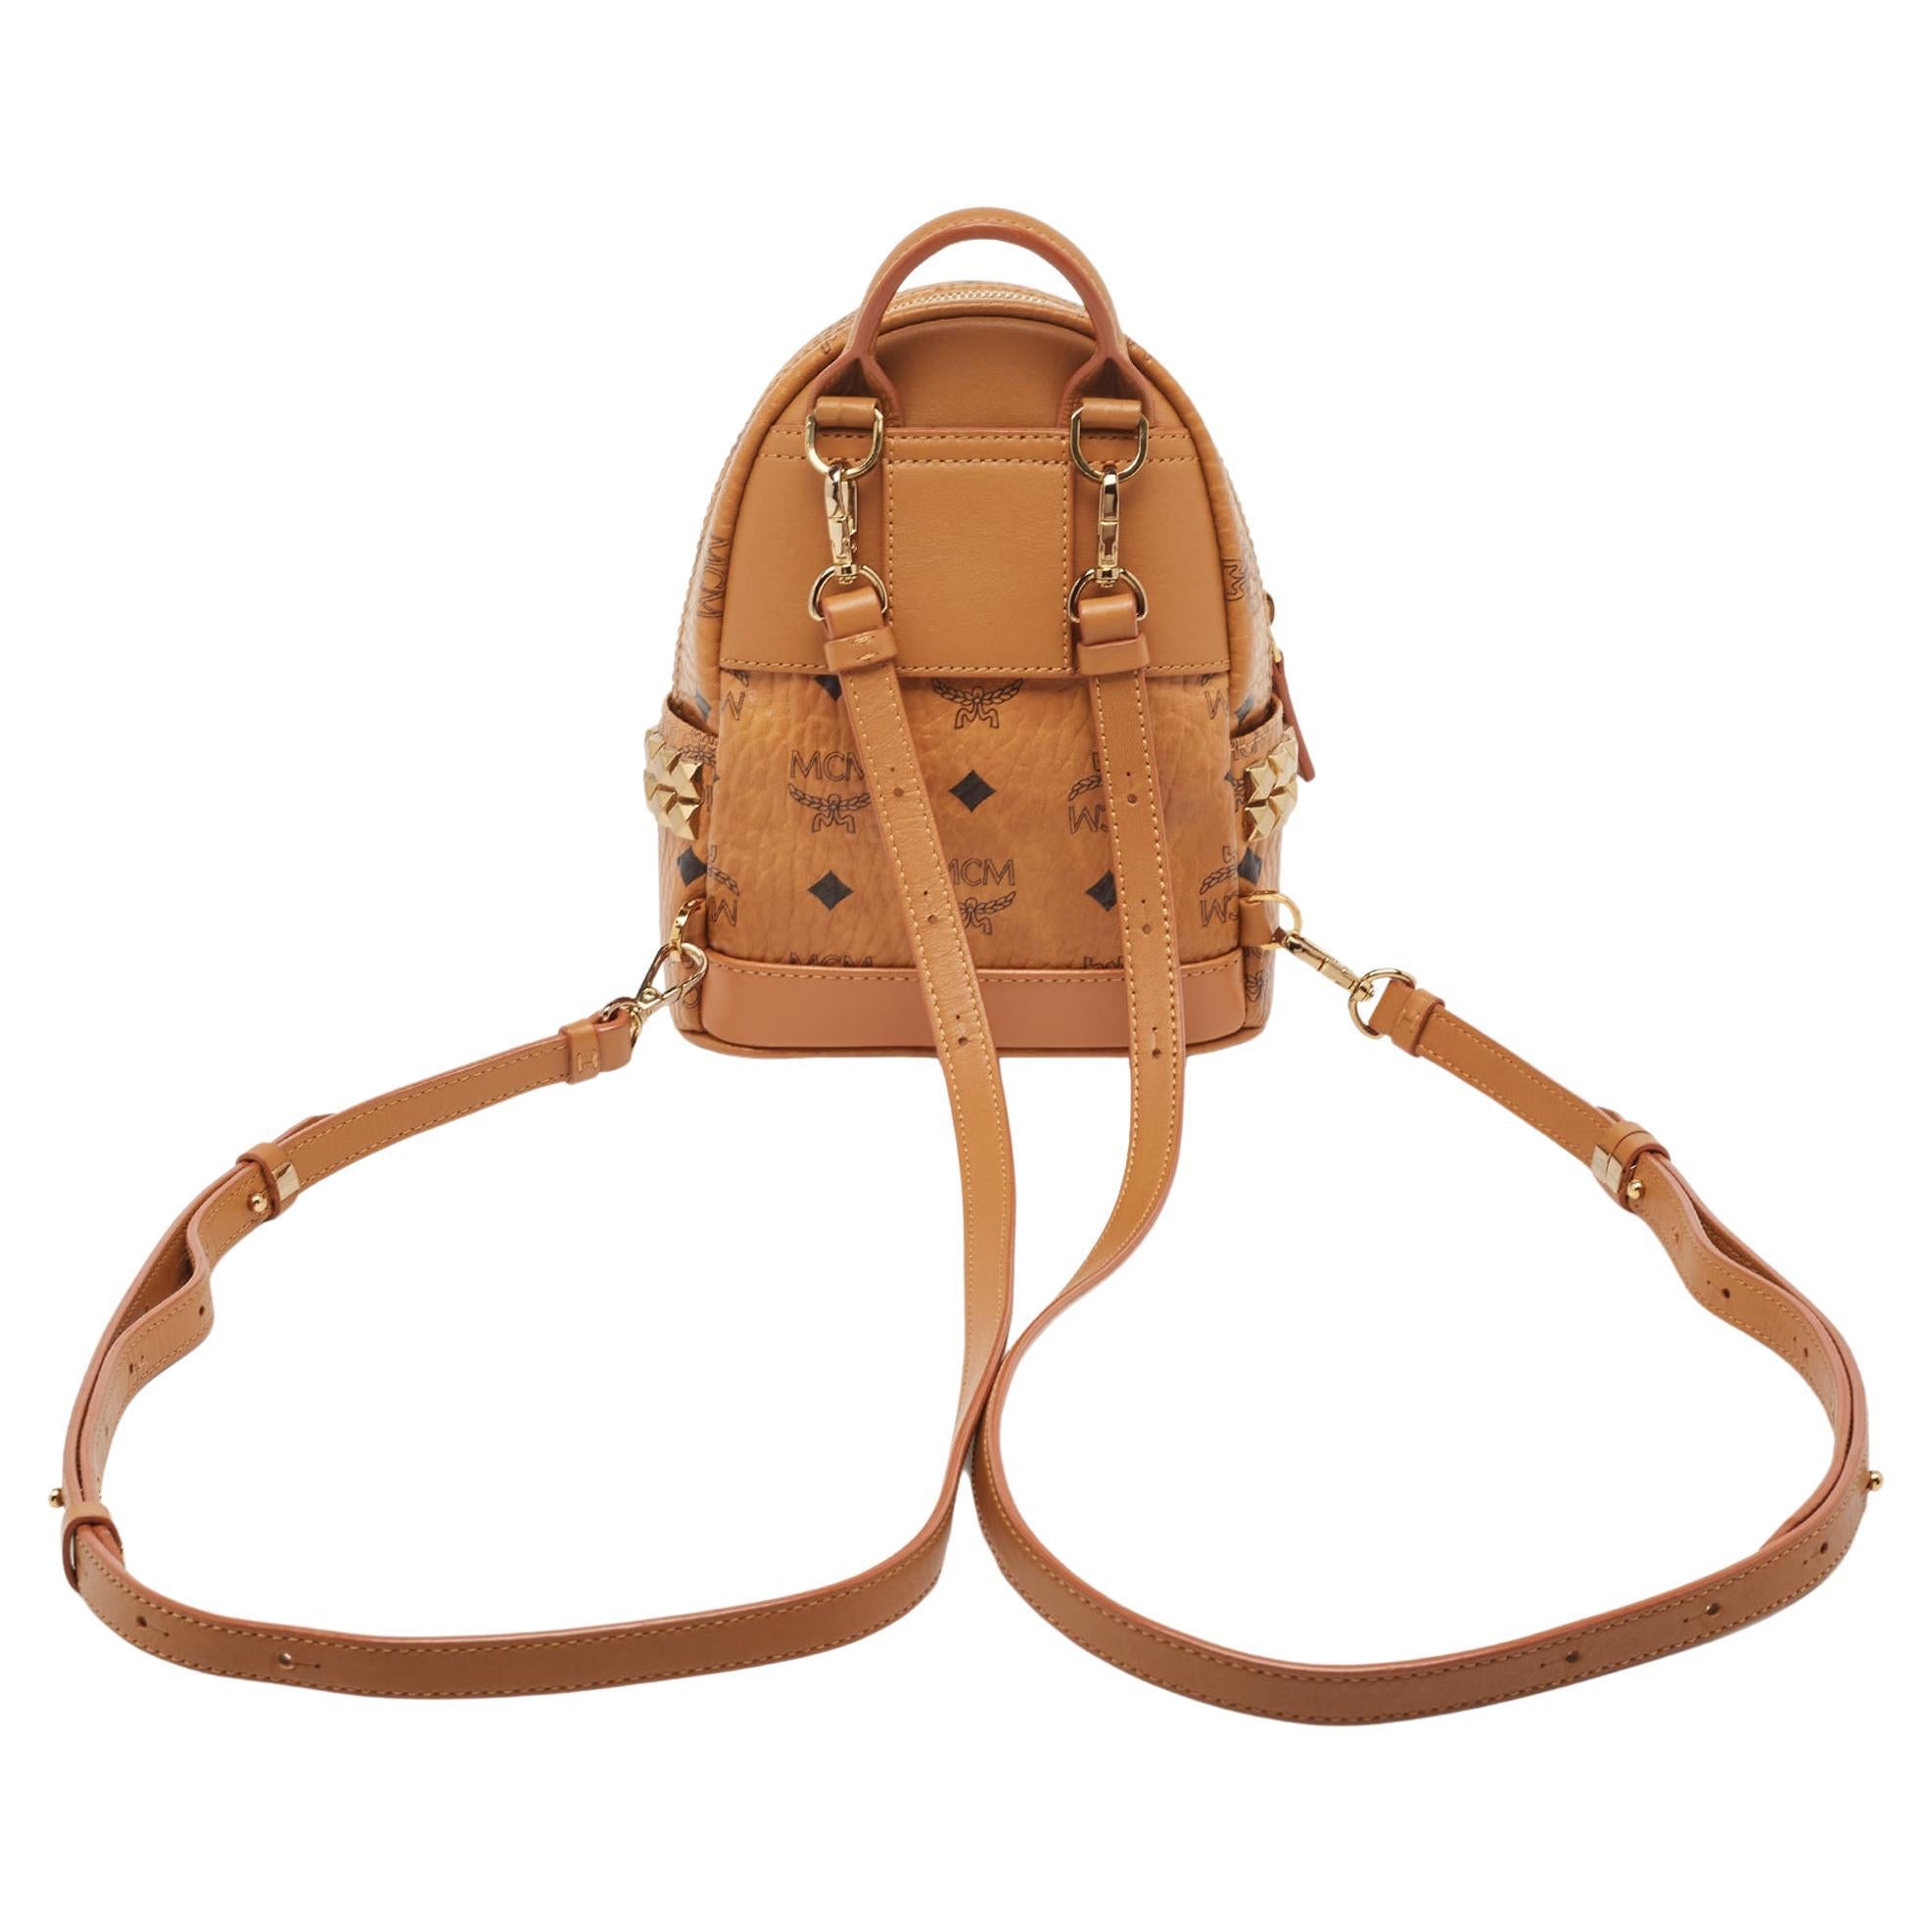 This MCM Stark-Bebe Boo backpack will come in handy for daily use or as a style statement. It is crafted from Visetos-coated canvas & leather and designed with gold-tone metal. It features a front zip pocket and two slip pockets on the